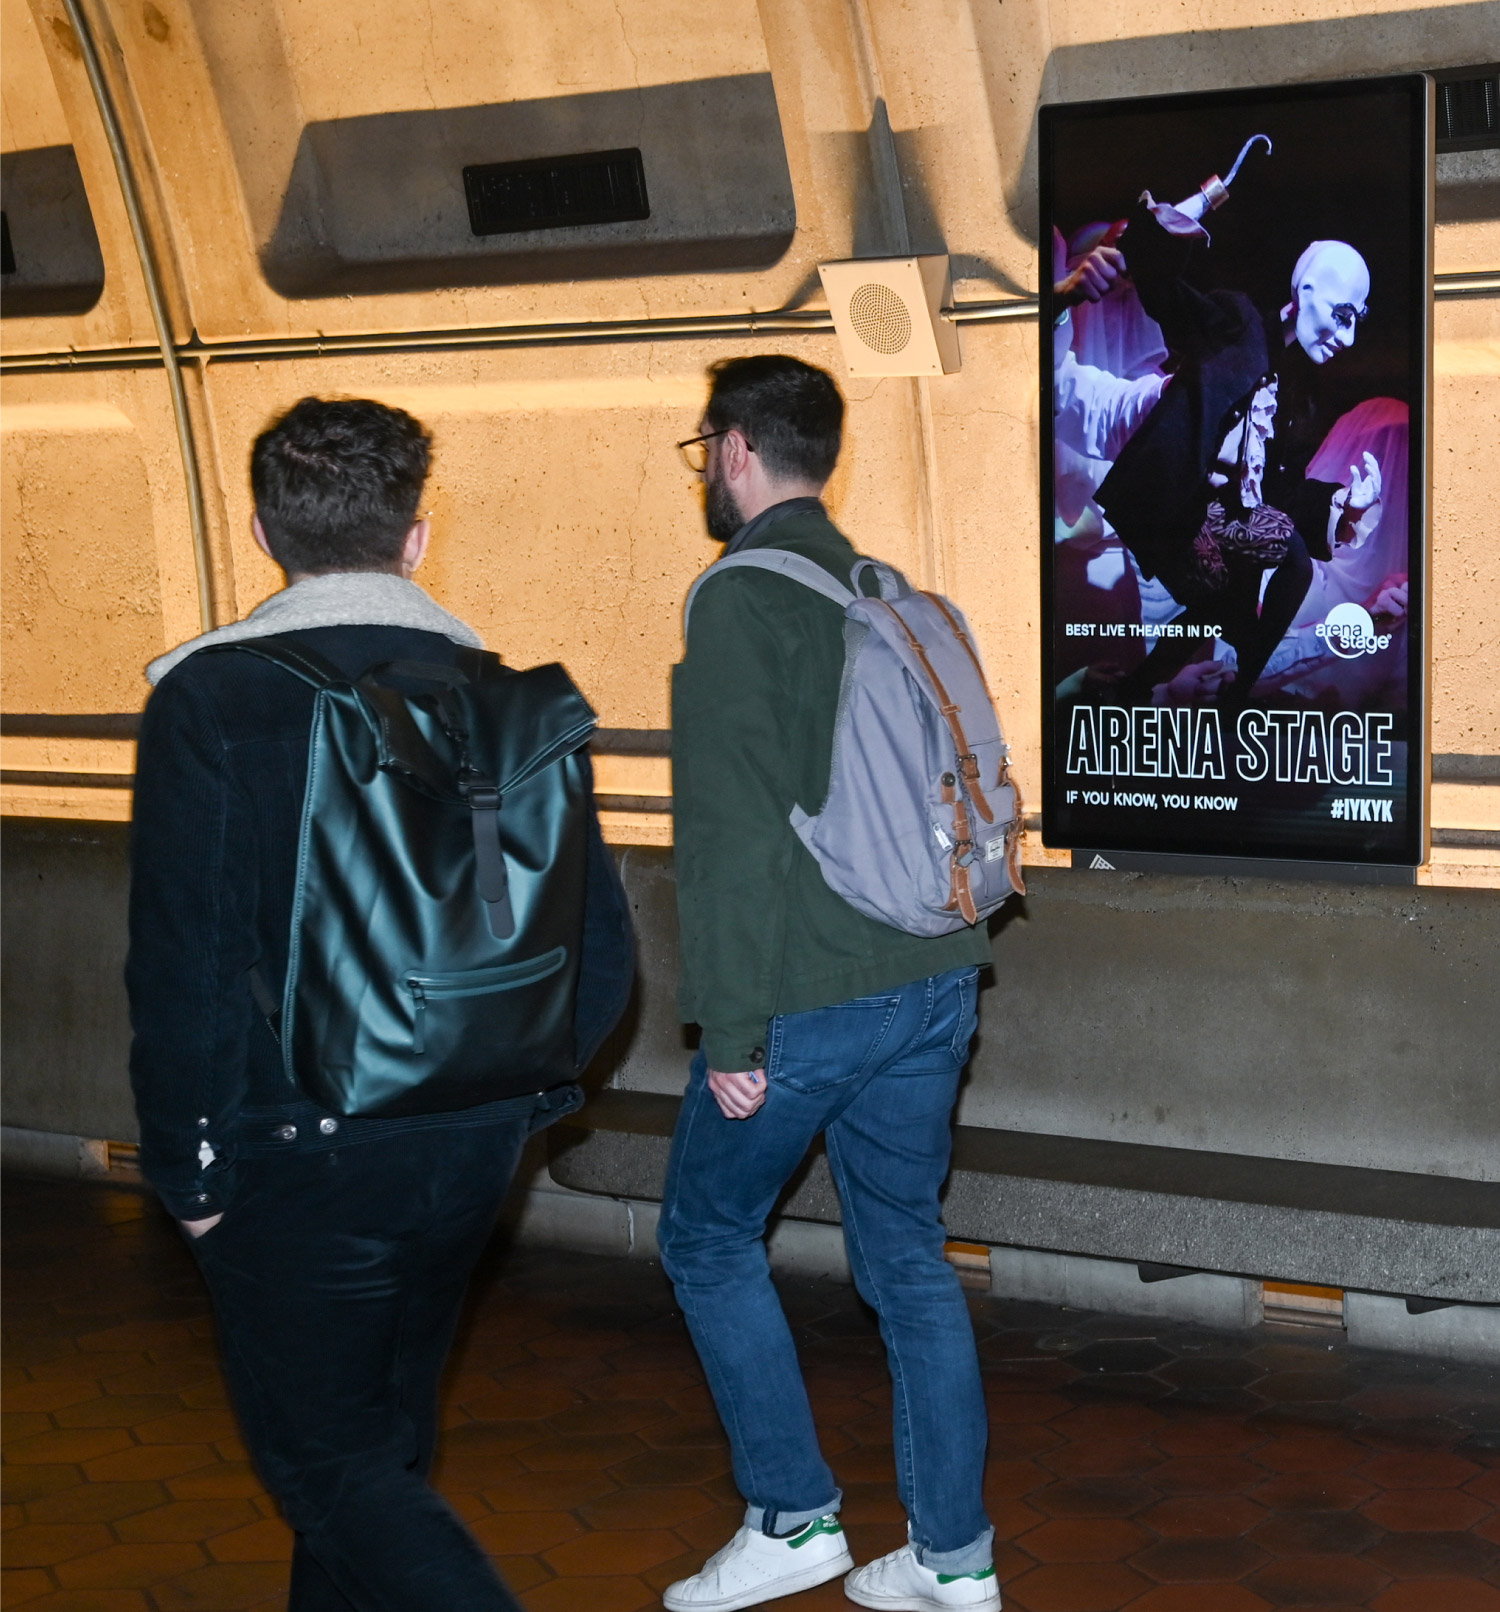 a photo taken on a Metro Platform in Washington, DC, with two people walking past a digital billboard that shows an Arena Stage digital ad.